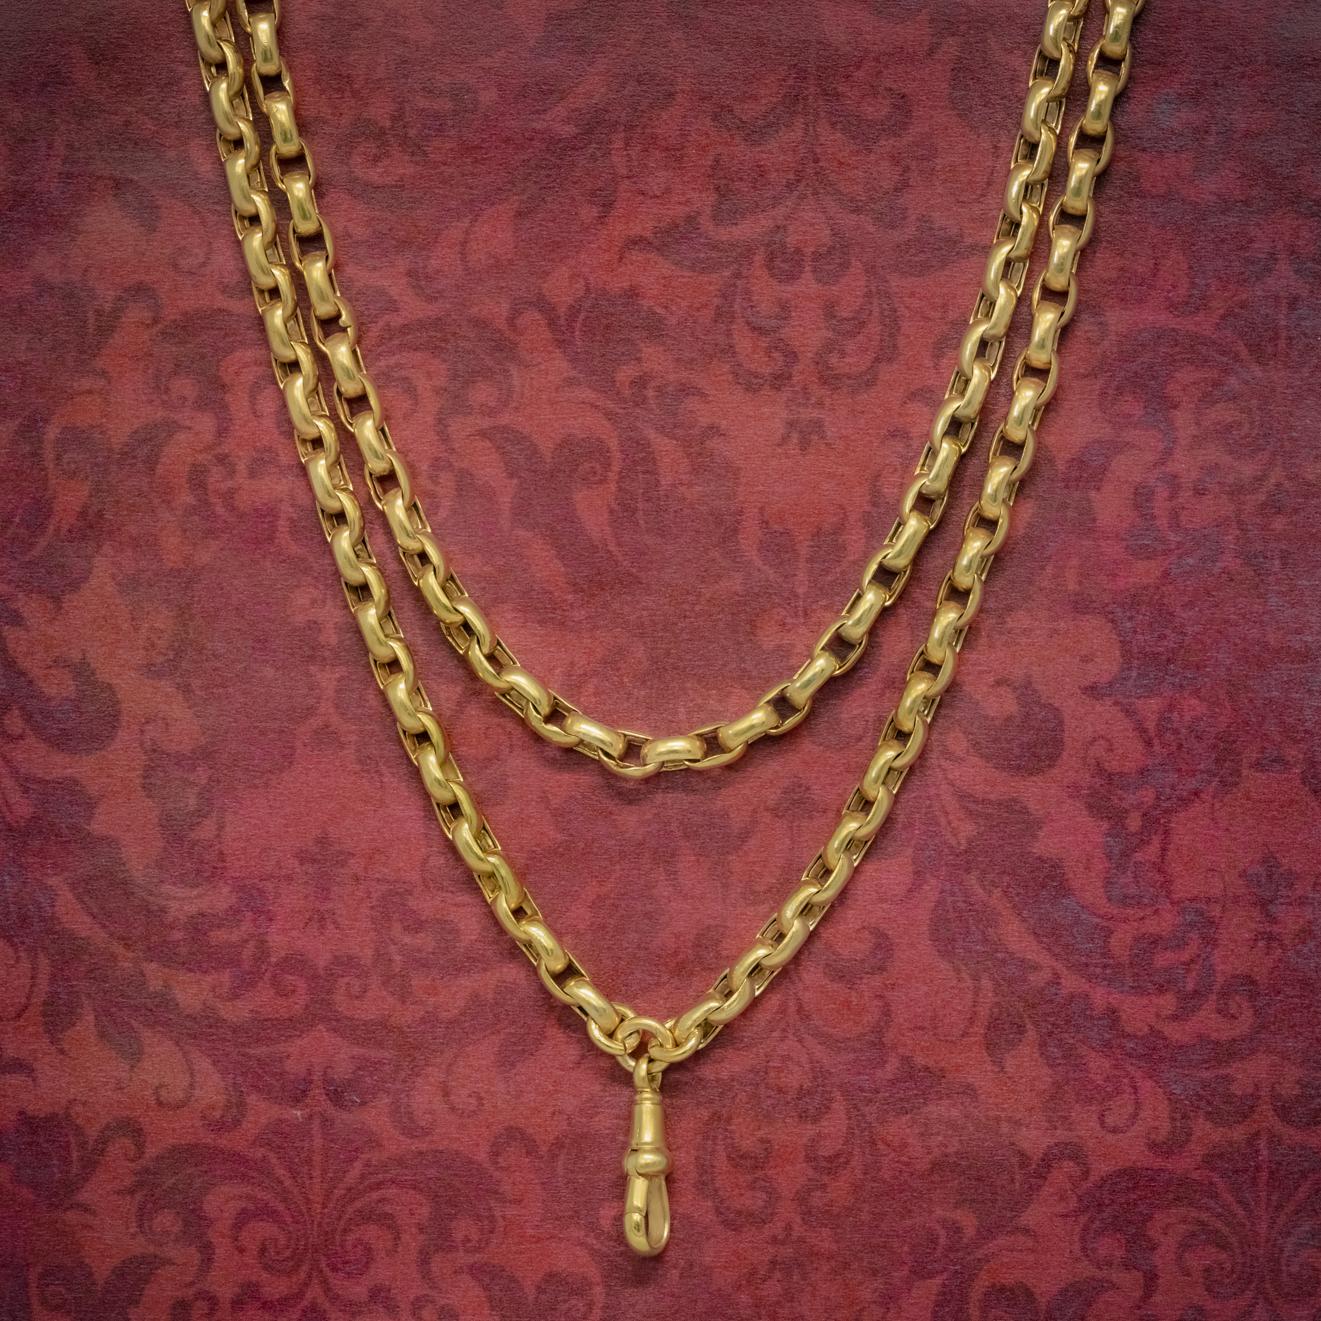 A robust Antique Victorian guard chain made up of strong Silver cable links which have been gilded in 18ct Yellow Gold. 

The chain is complete with a hinged clasp at the end which may have been used to attach a pocket watch or a cylinder of fur